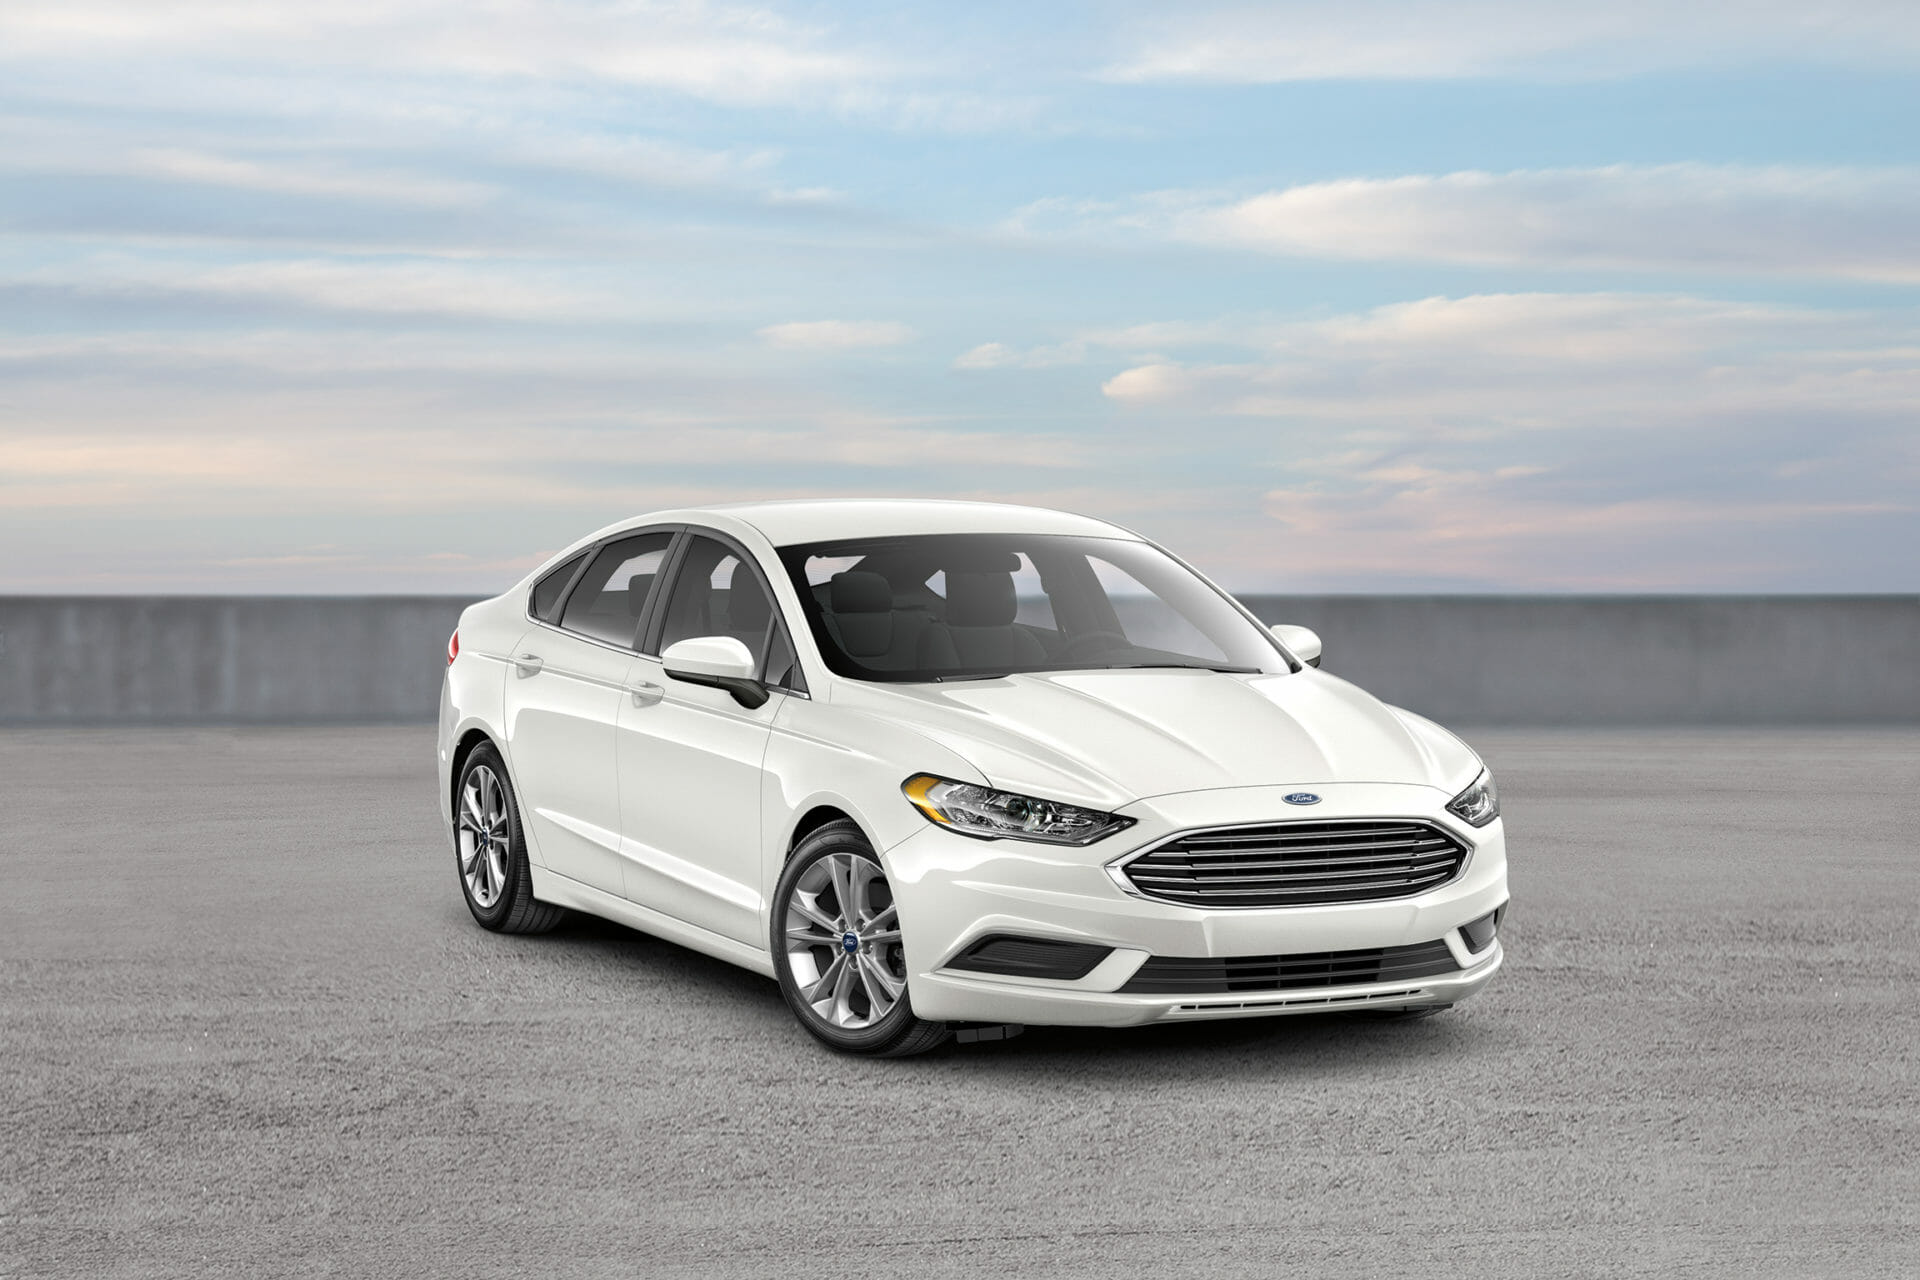 2018 Ford Fusion Review A Wellequipped, Safe Sedan with Optional AWD